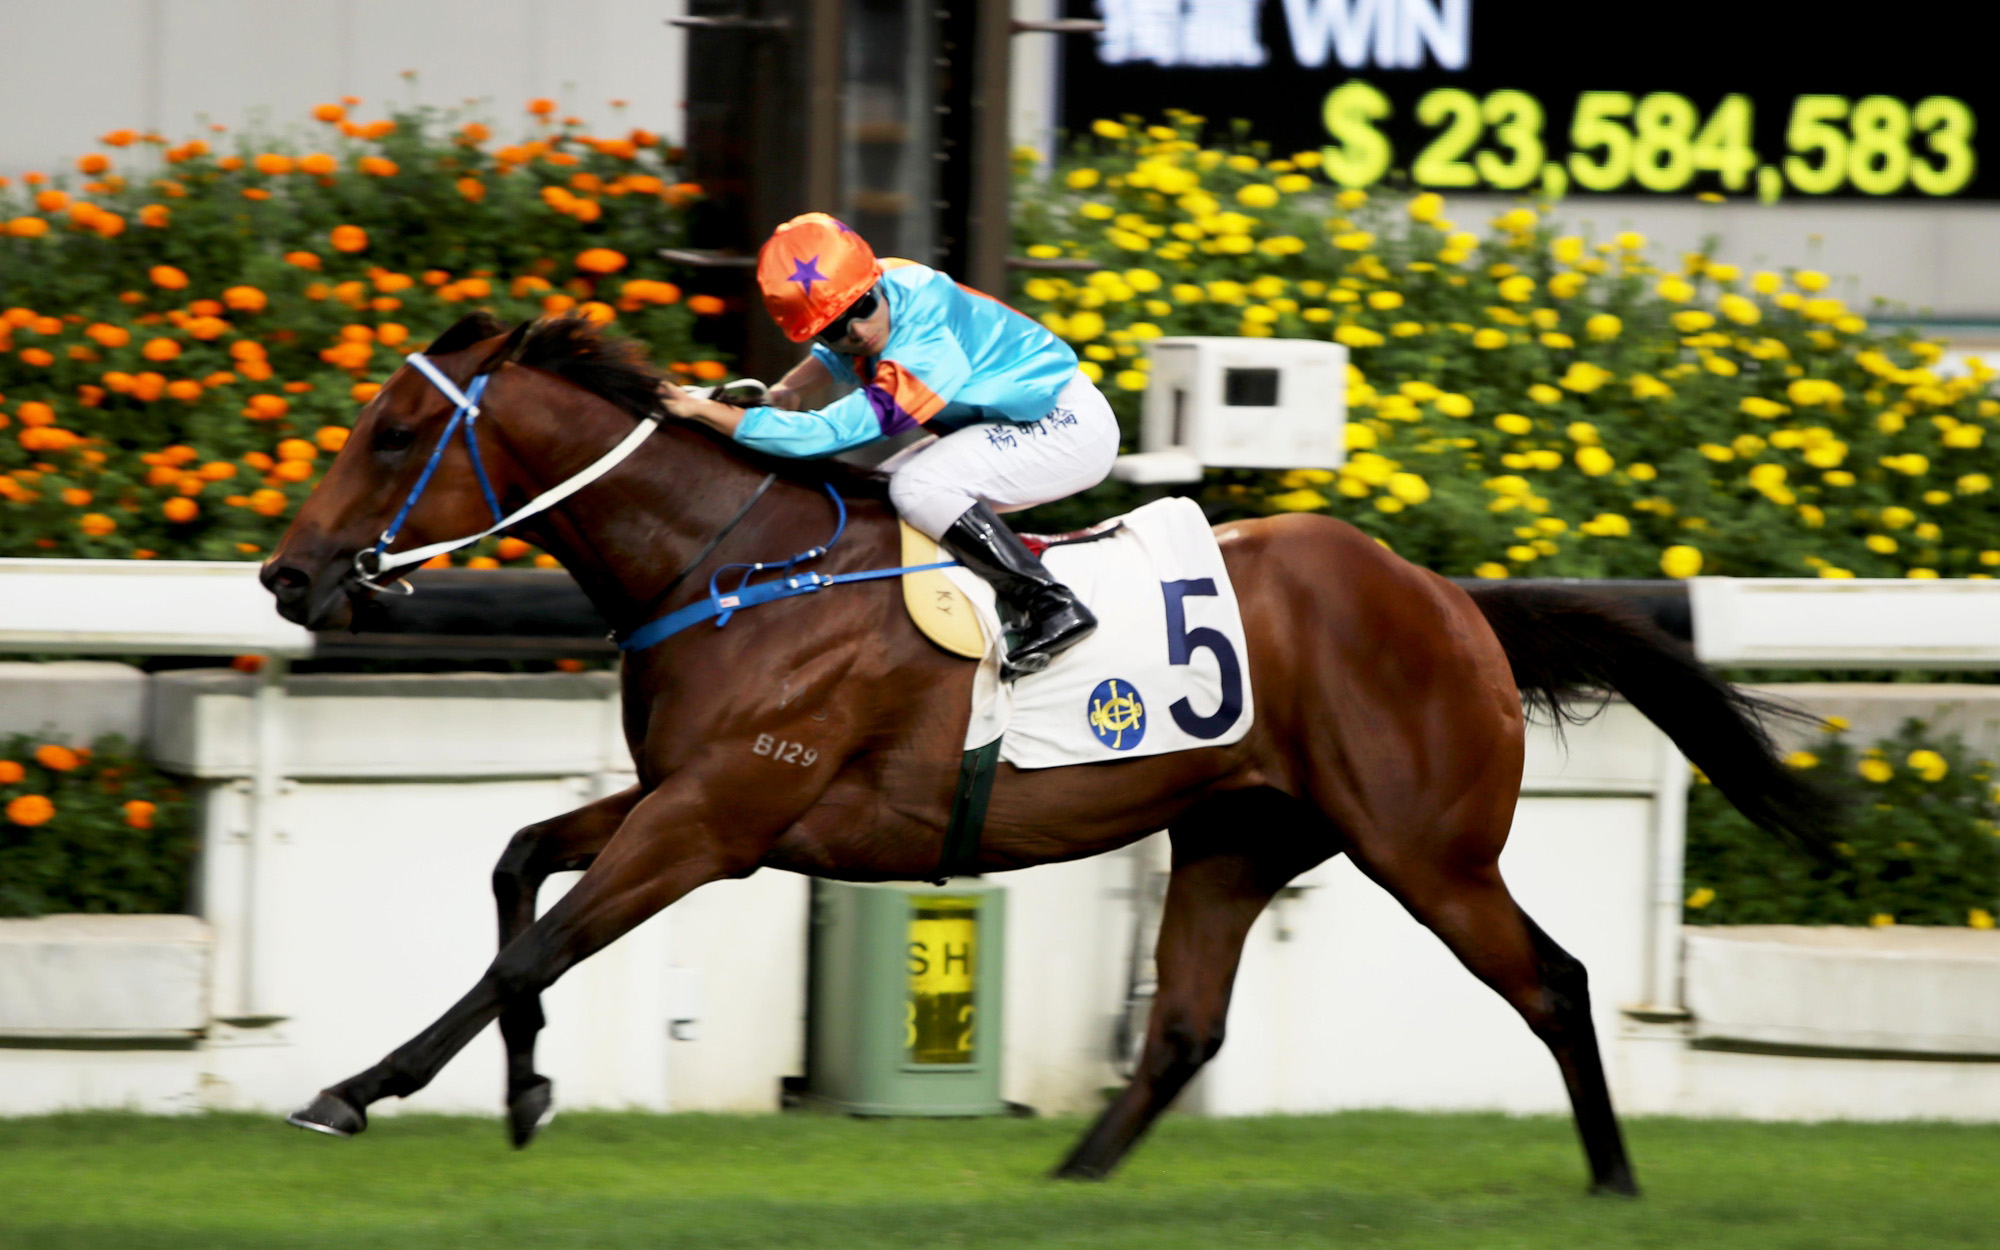 Dances With Dragon – HK : G1 winner in New Zealand pre-import; proven a solid performer since switching to Caspar Fownes’ yard adding four wins including G3 Premier Plate romp.